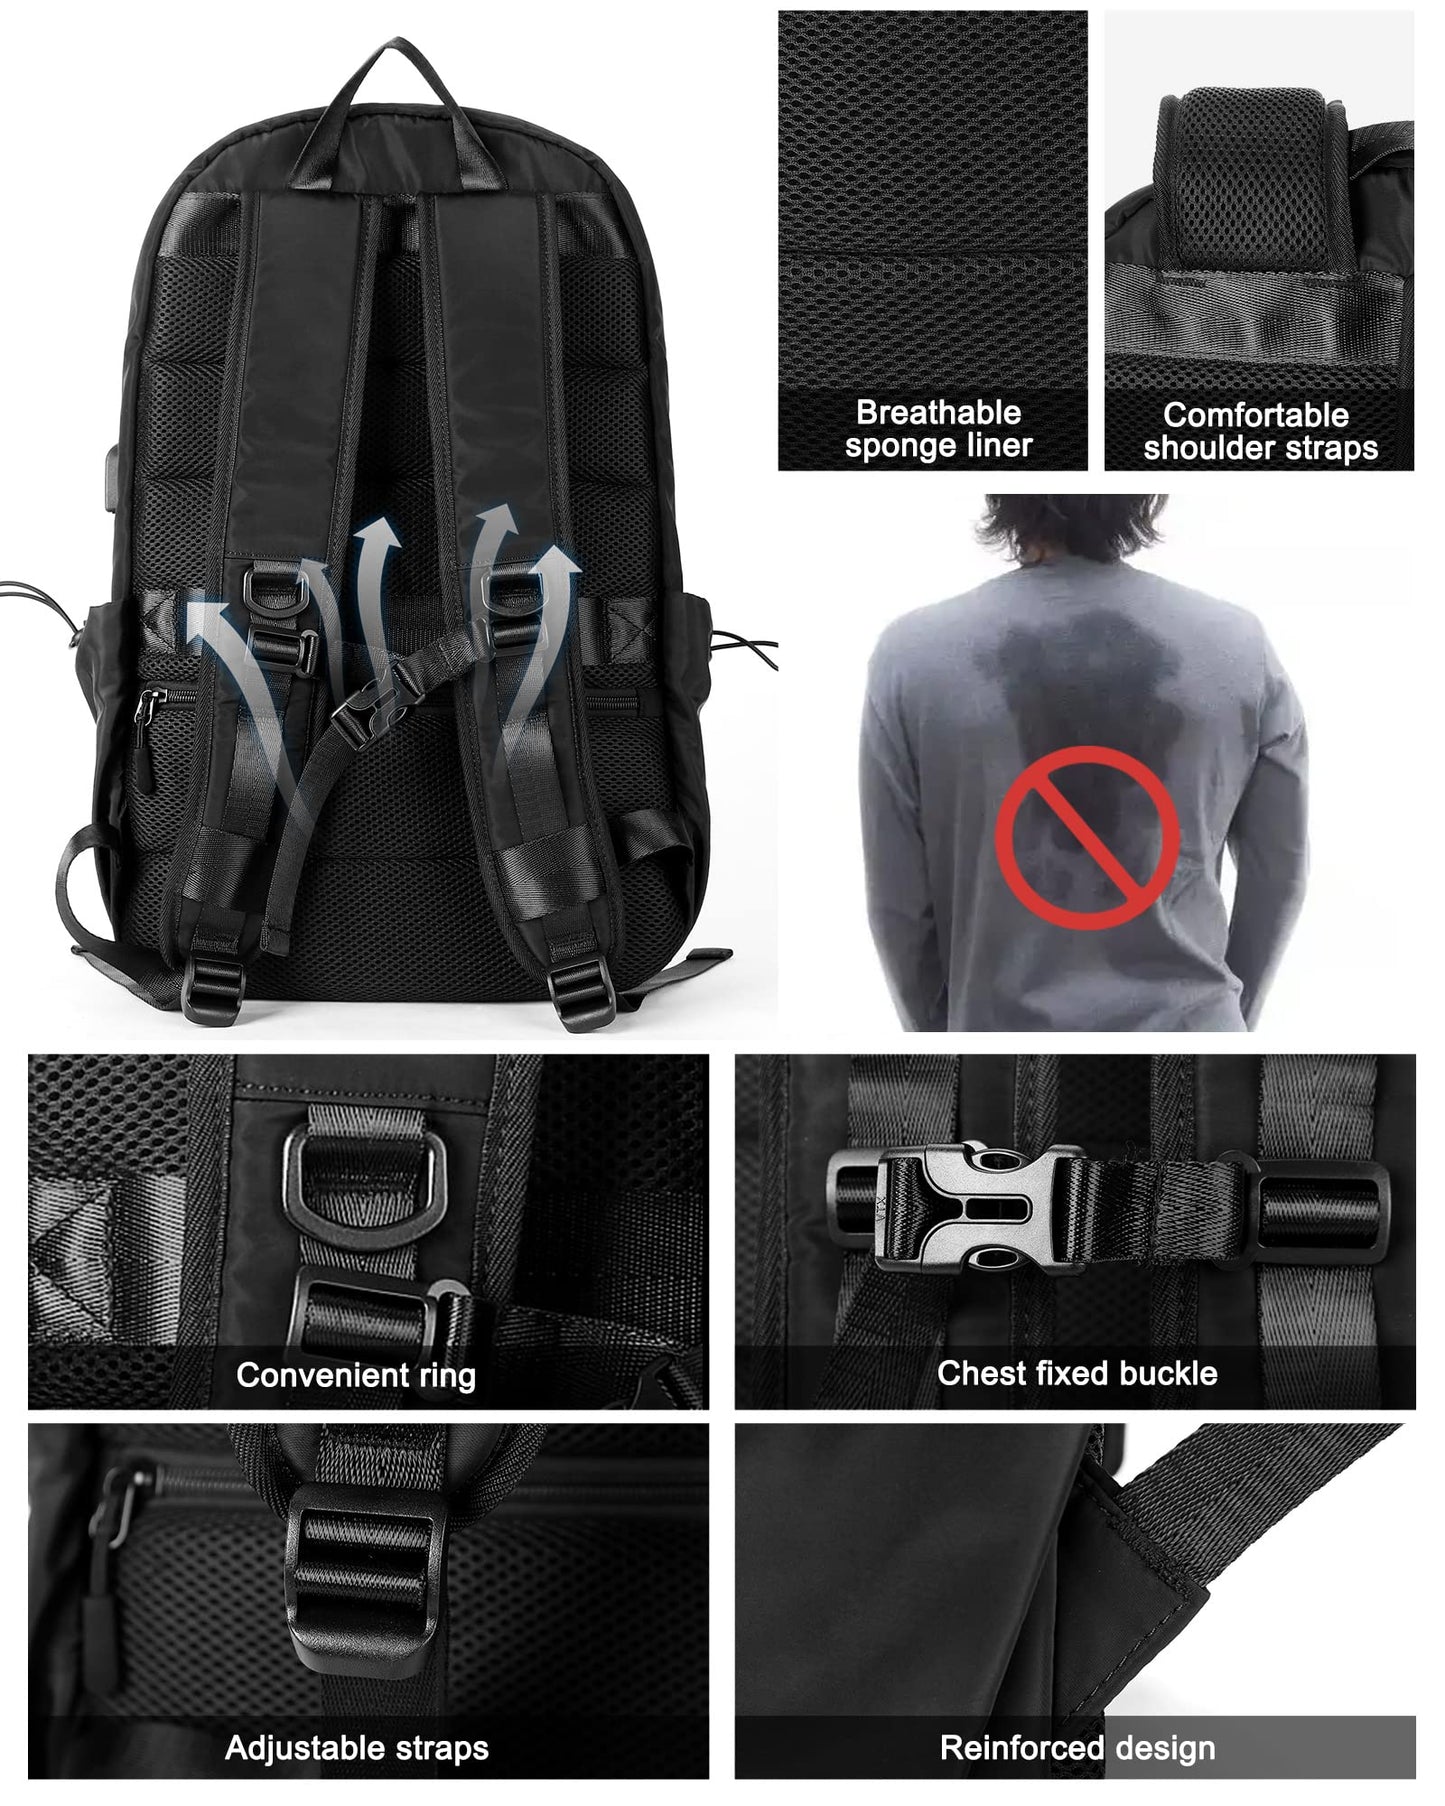 Business Backpack Travel Backpack Water Resistant Anti-Theft Computer Backpack Laptop Backpack.